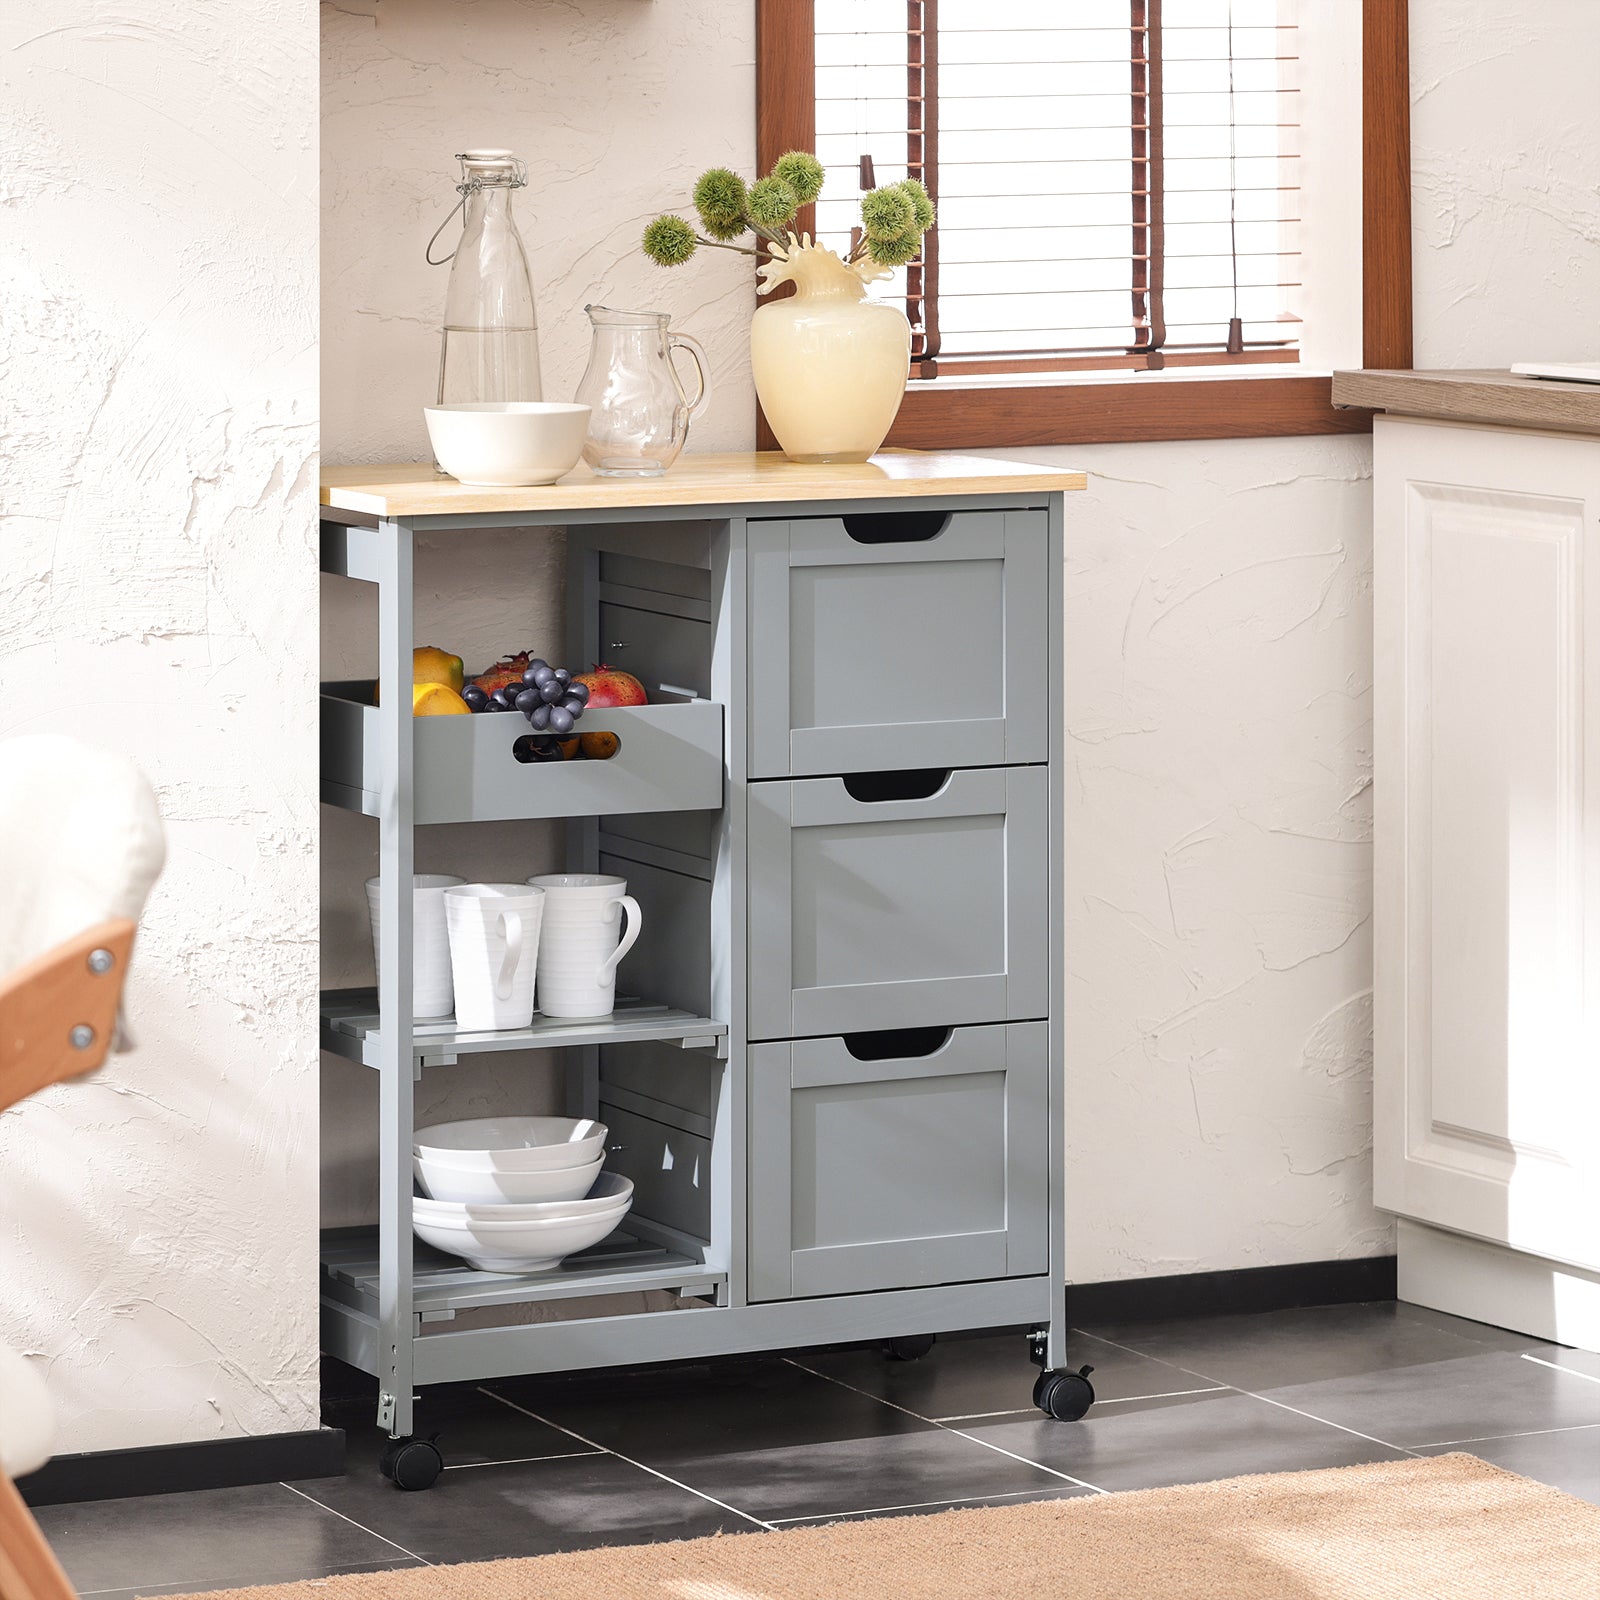 SoBuy FKW79-HG, Kitchen Trolley Cart Storage Serving Trolley With 3 Drawers And Removable Tray